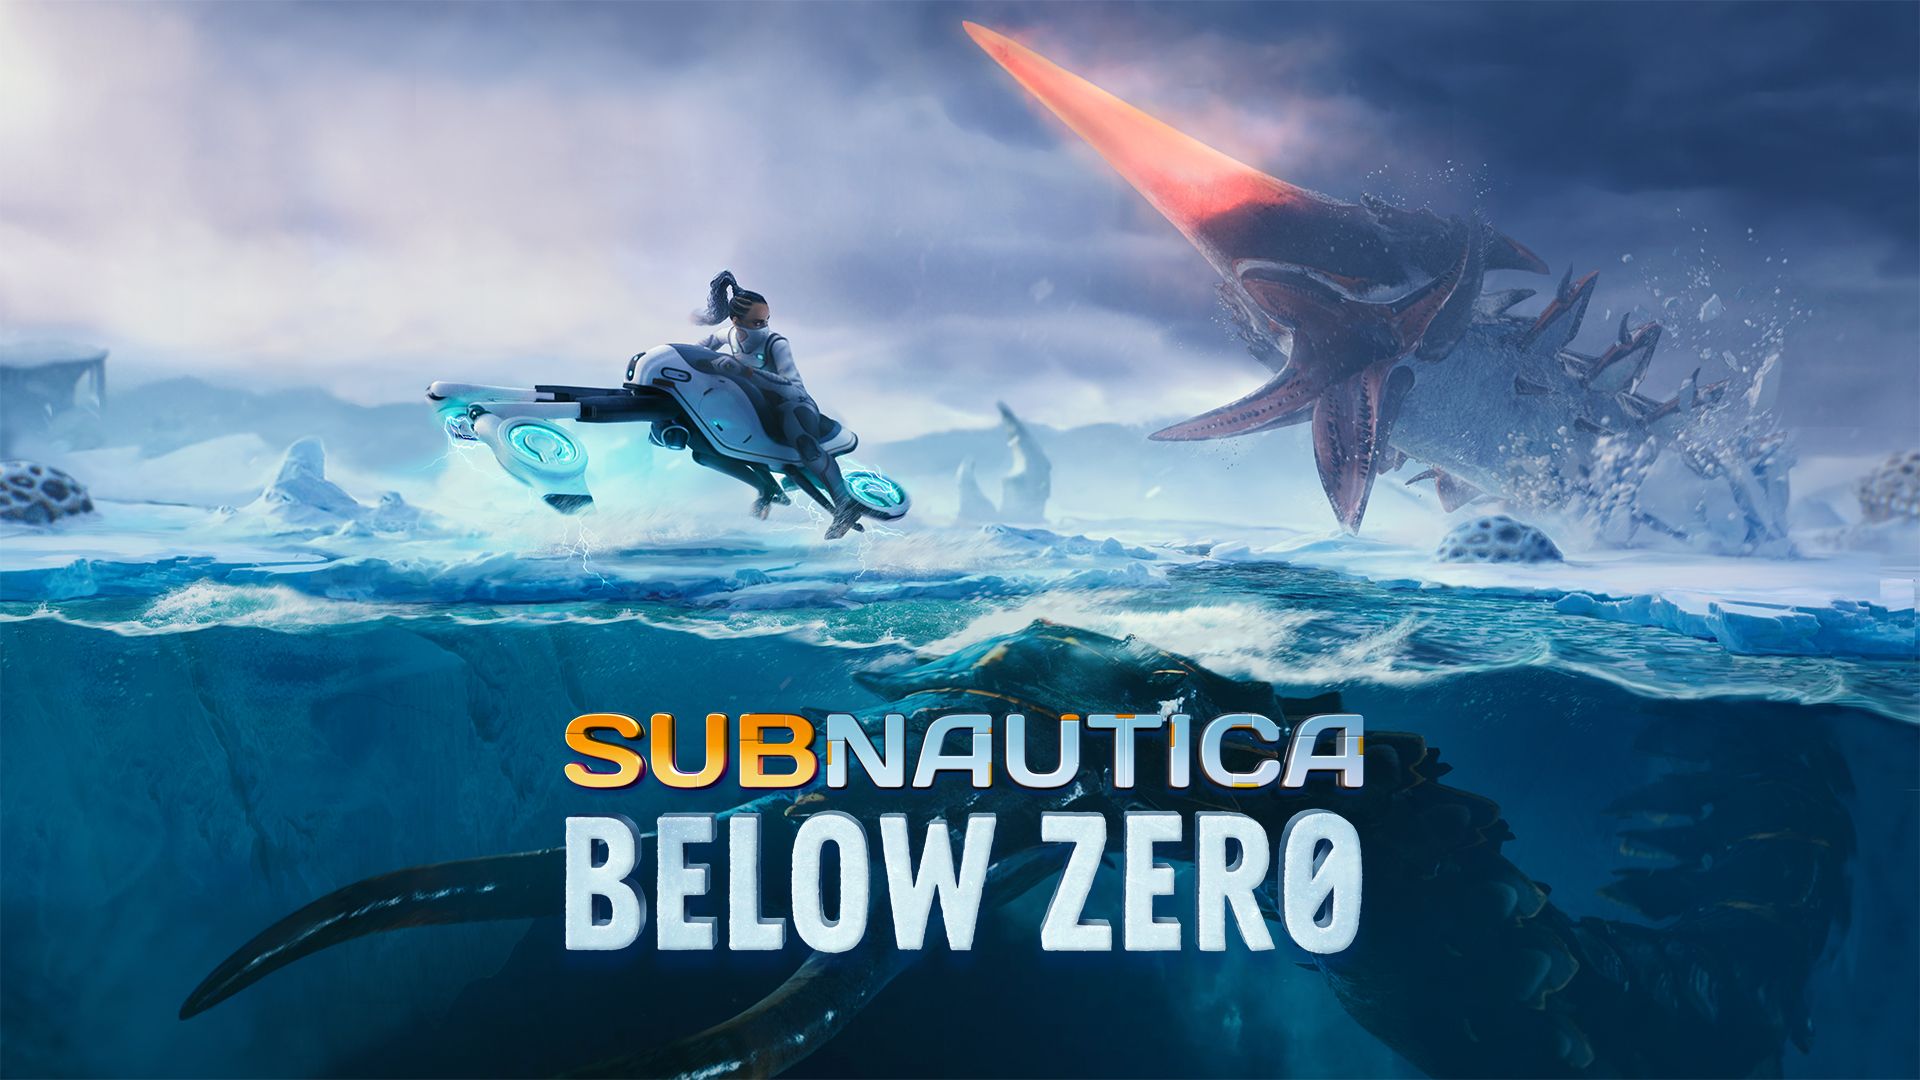 subnautica_below_zero_splash Subnautica: Below Zero Is Finally Out of Early Access - Are You Ready For More Leviathans?